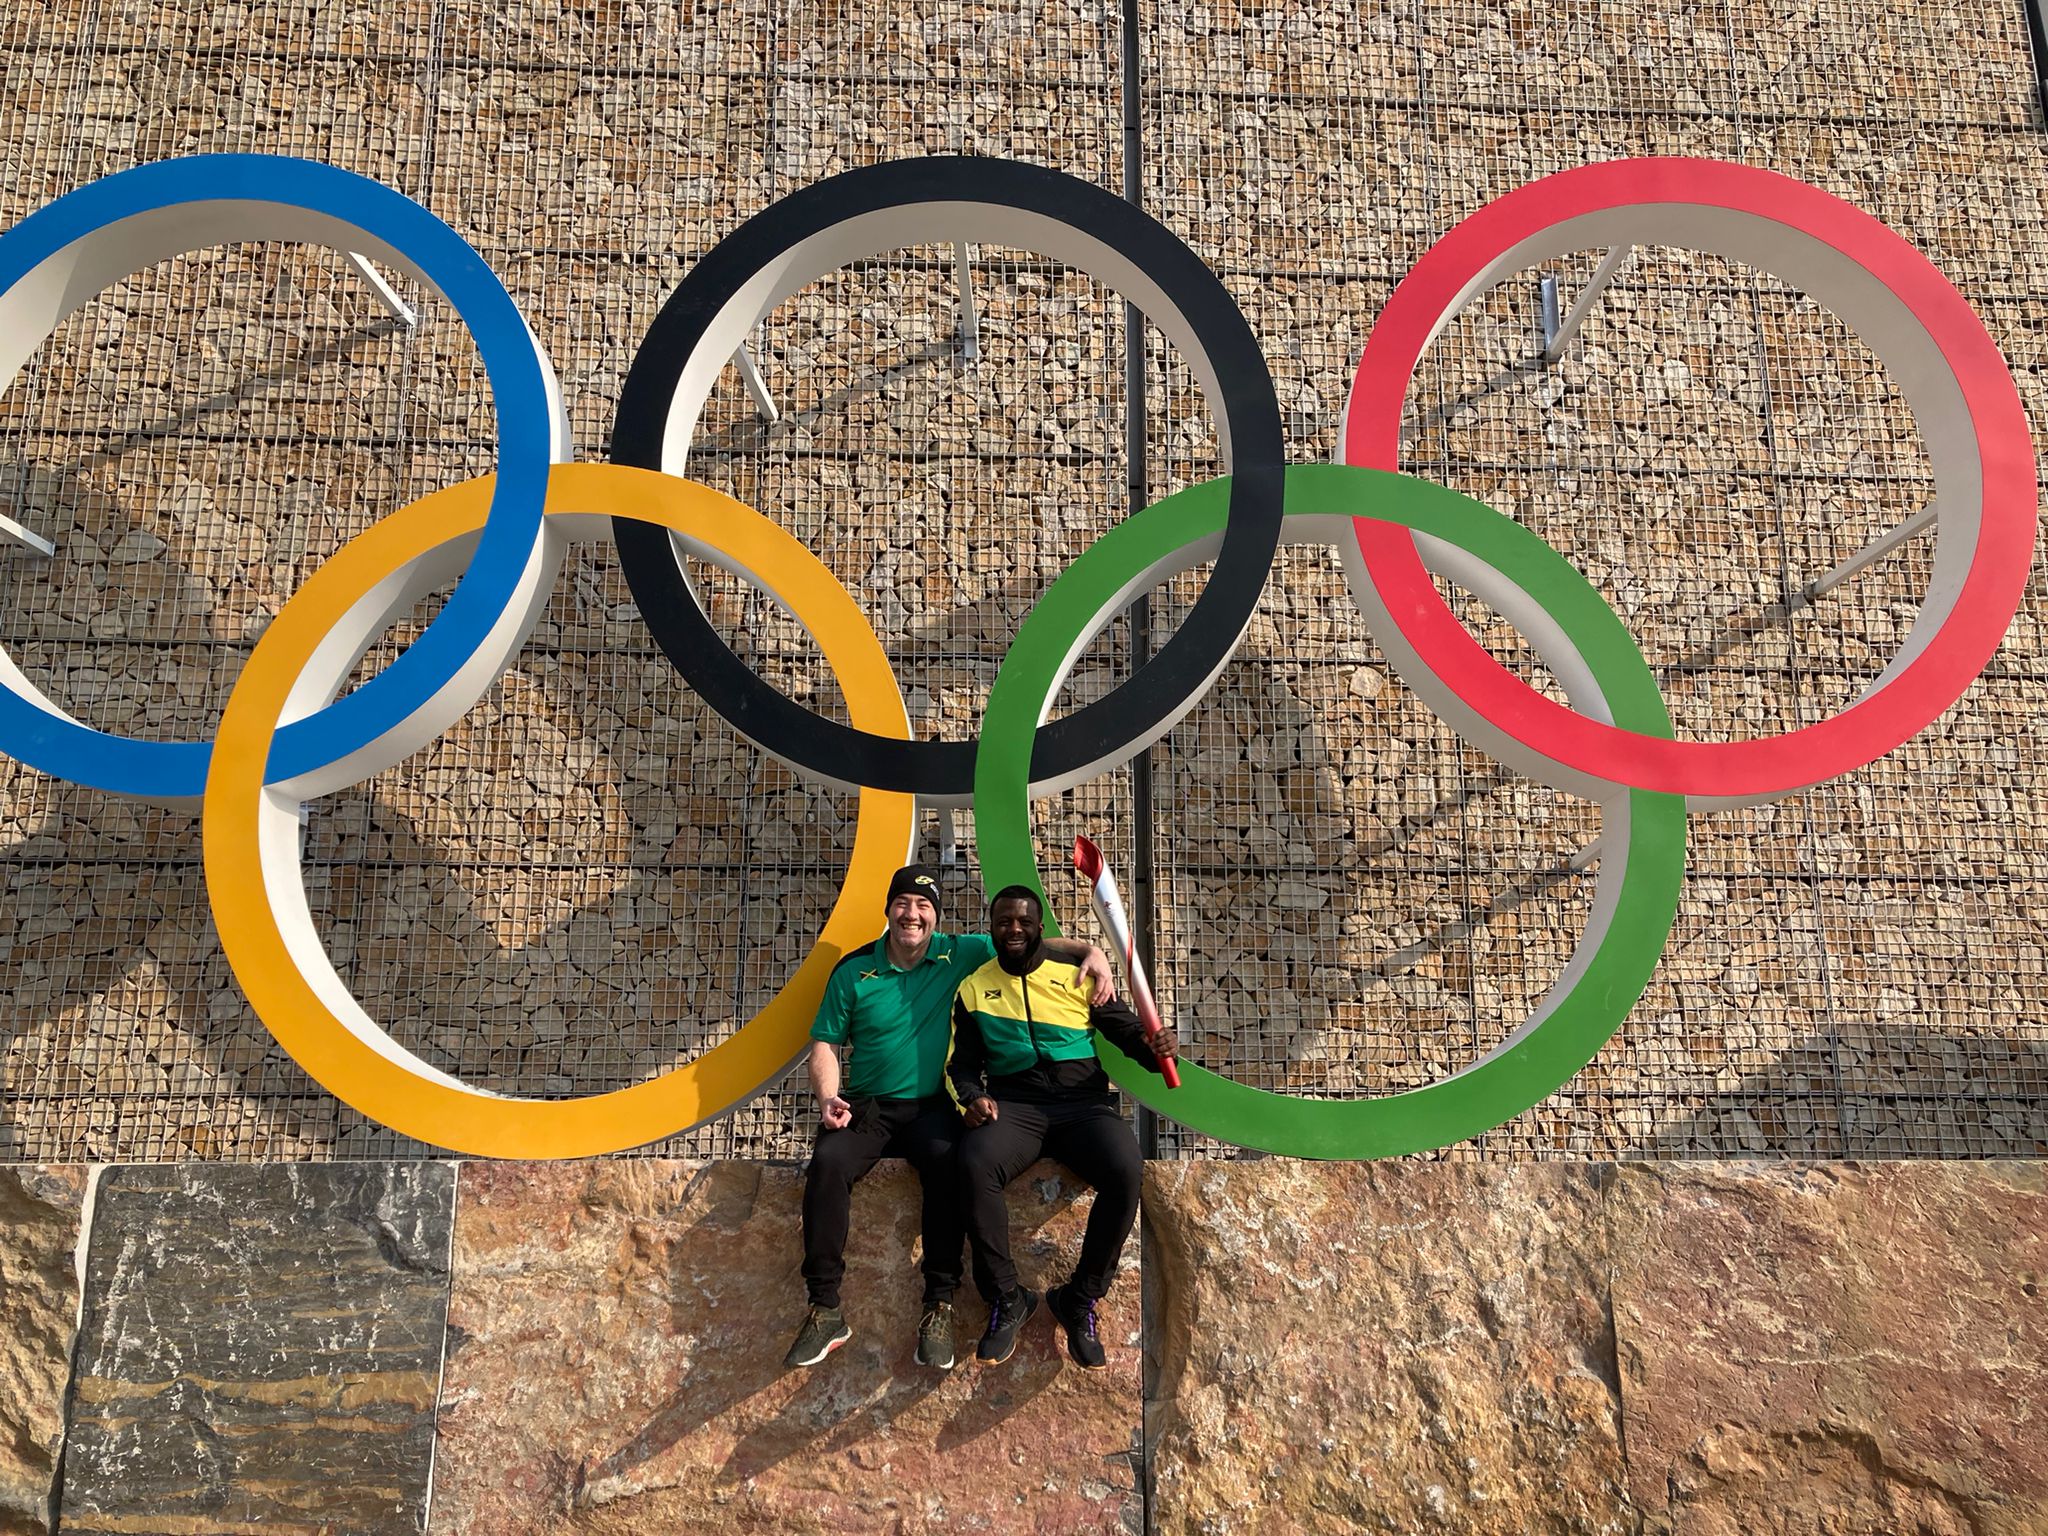 Shanywayne holds Olympic torch with a friend, while sitting on rocky ledge by Olympic rings.